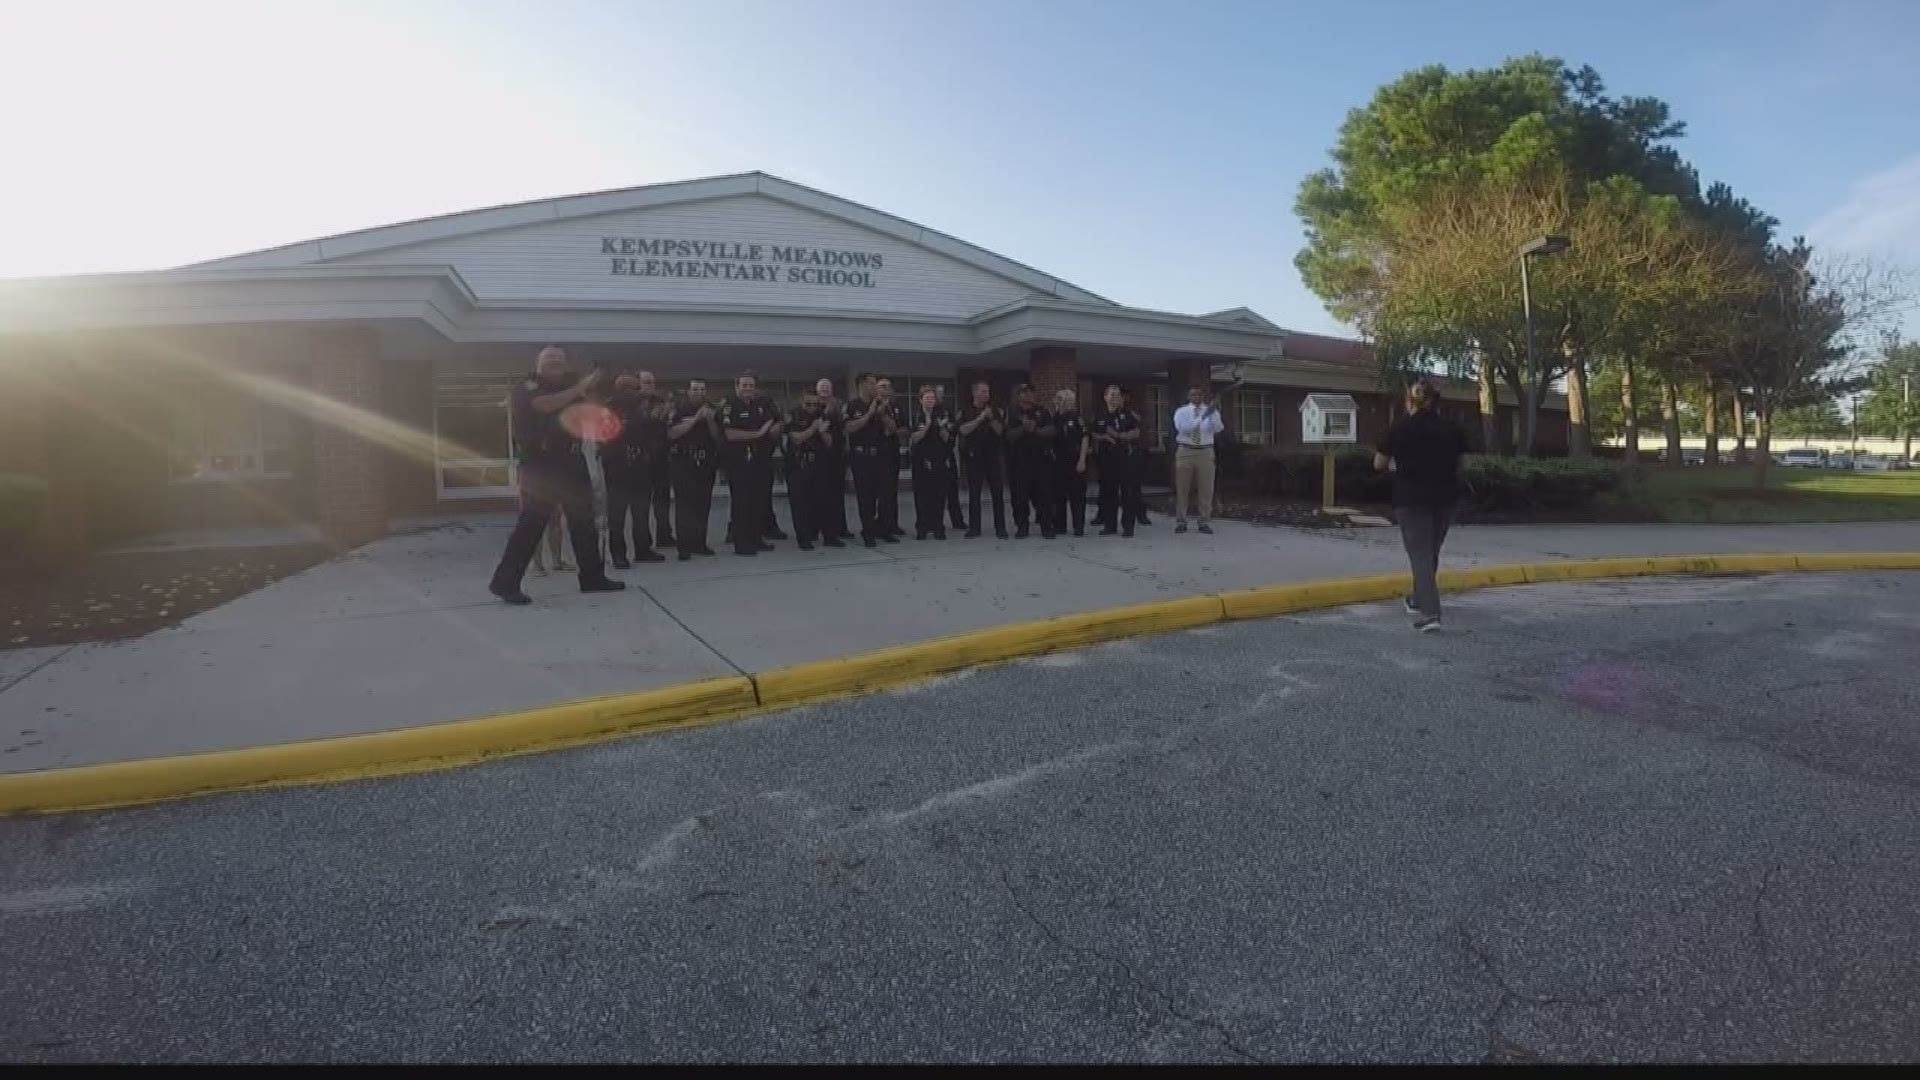 Students at Kempsville Meadows Elementary School had an extra special welcome back.